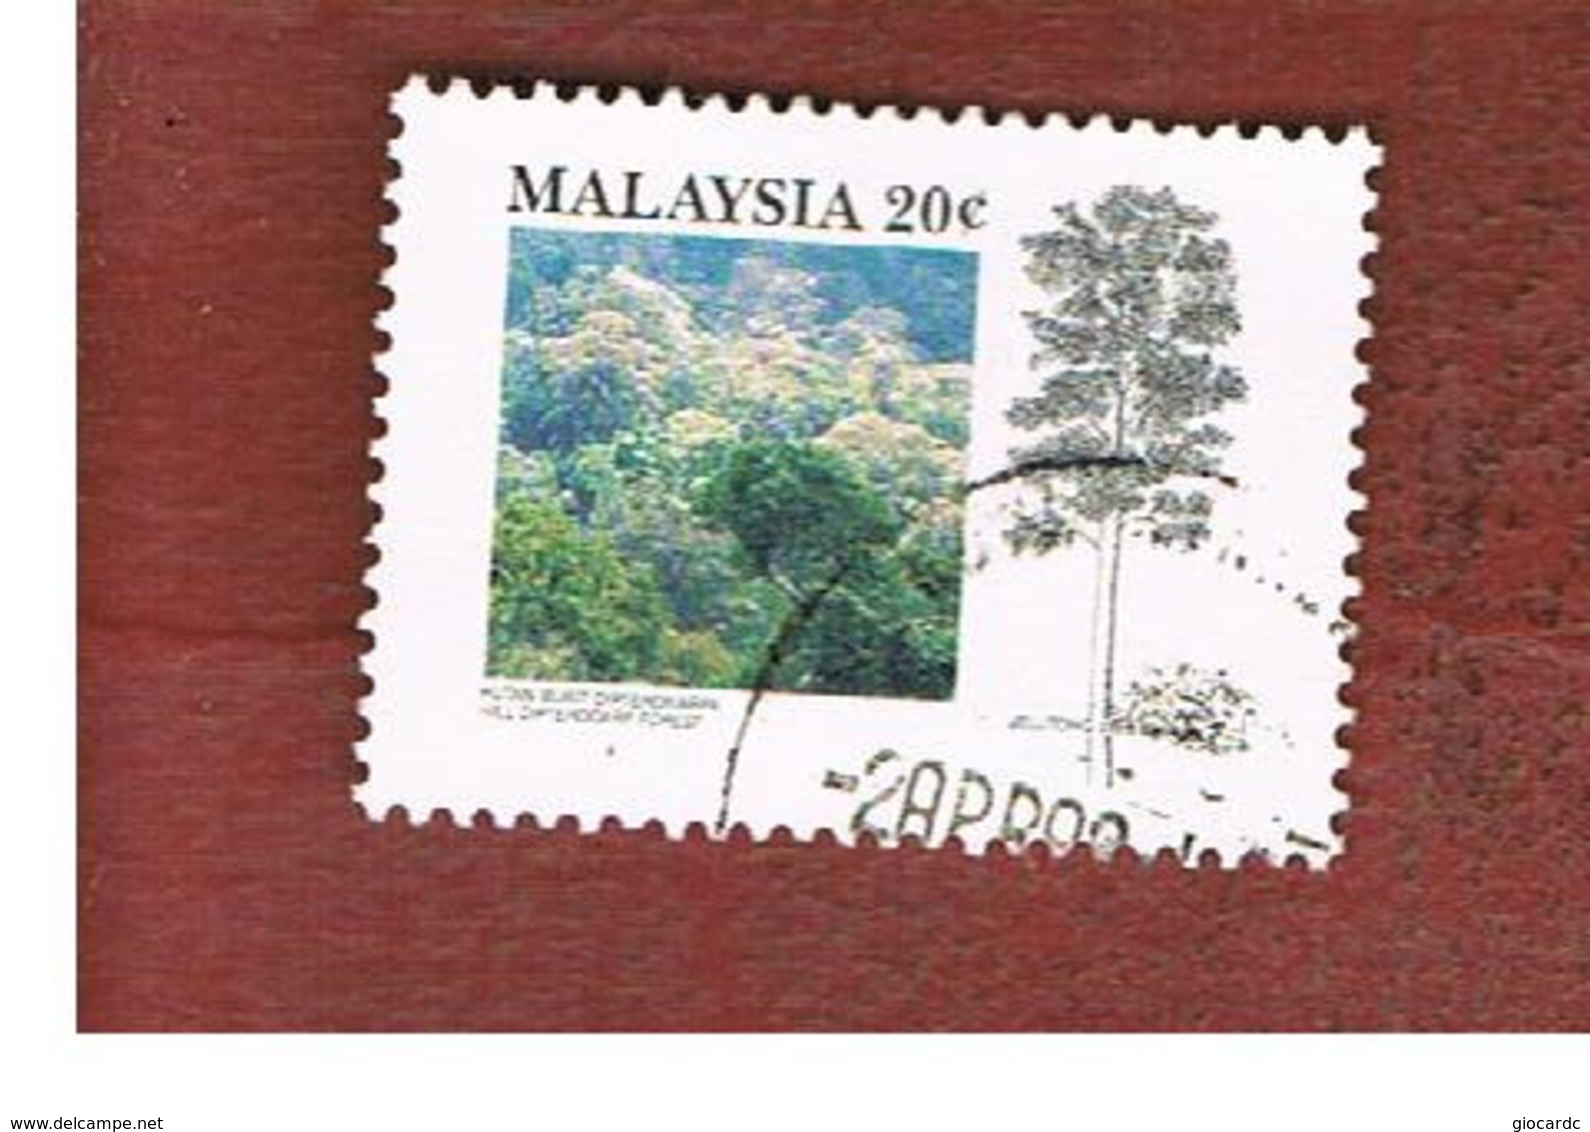 MALESIA (MALAYSIA)  -  SG 476  -   1992  TROPICAL FORESTS: HILL FOREST -  USED ° - Malaysia (1964-...)